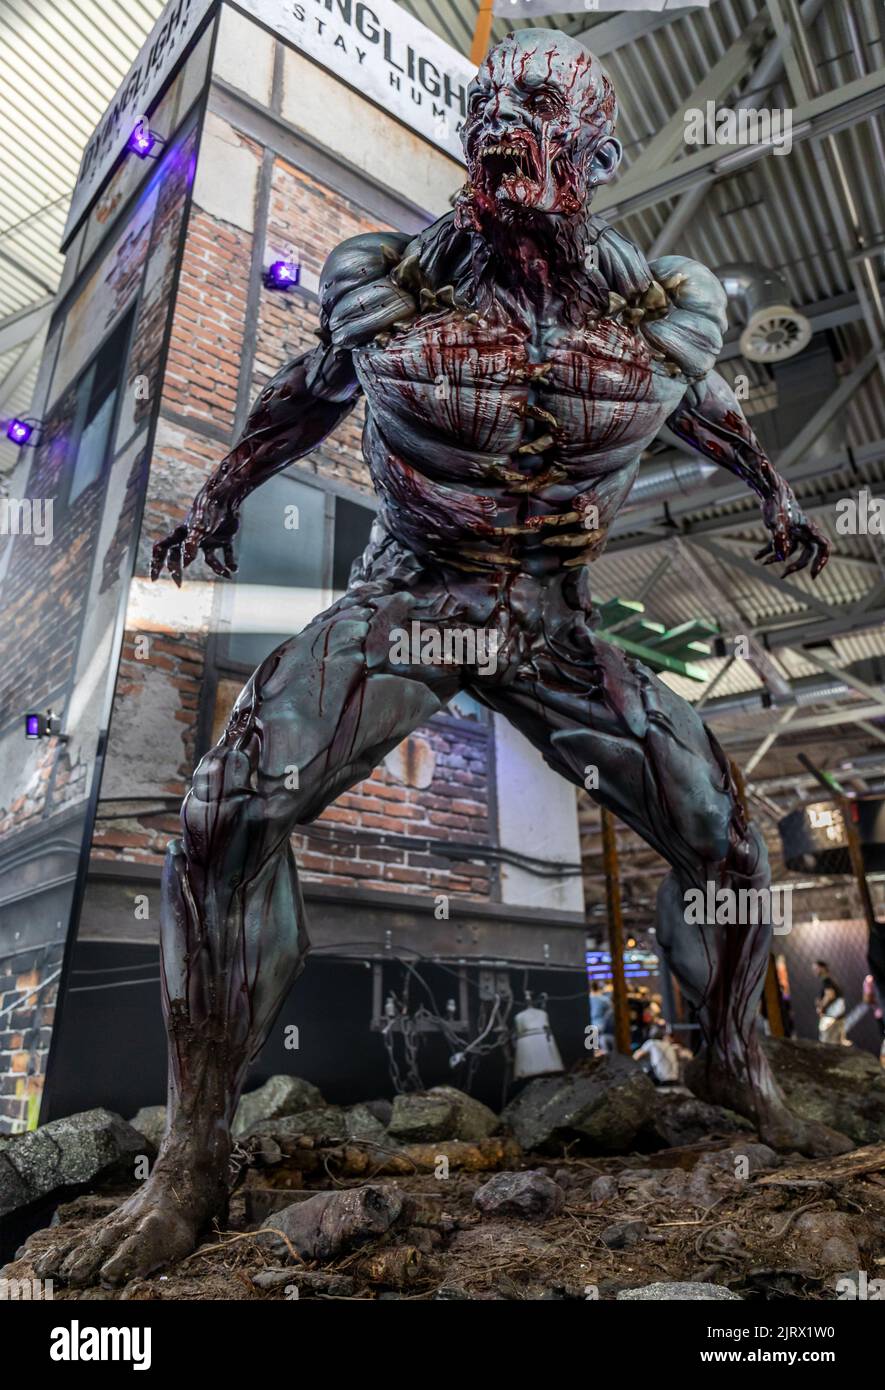 Cologne, Germany. 24th Aug, 2022. Gamescom 2022: Zombie figure in front of booth for survival horror game Dying Light 2 Stay Human, developed and published by Techland. Gamescom is the world's largest trade fair for computer and video games, at Koelnmesse in Cologne, Germany. Photocredit: Christian Lademann / lademann.media Stock Photo